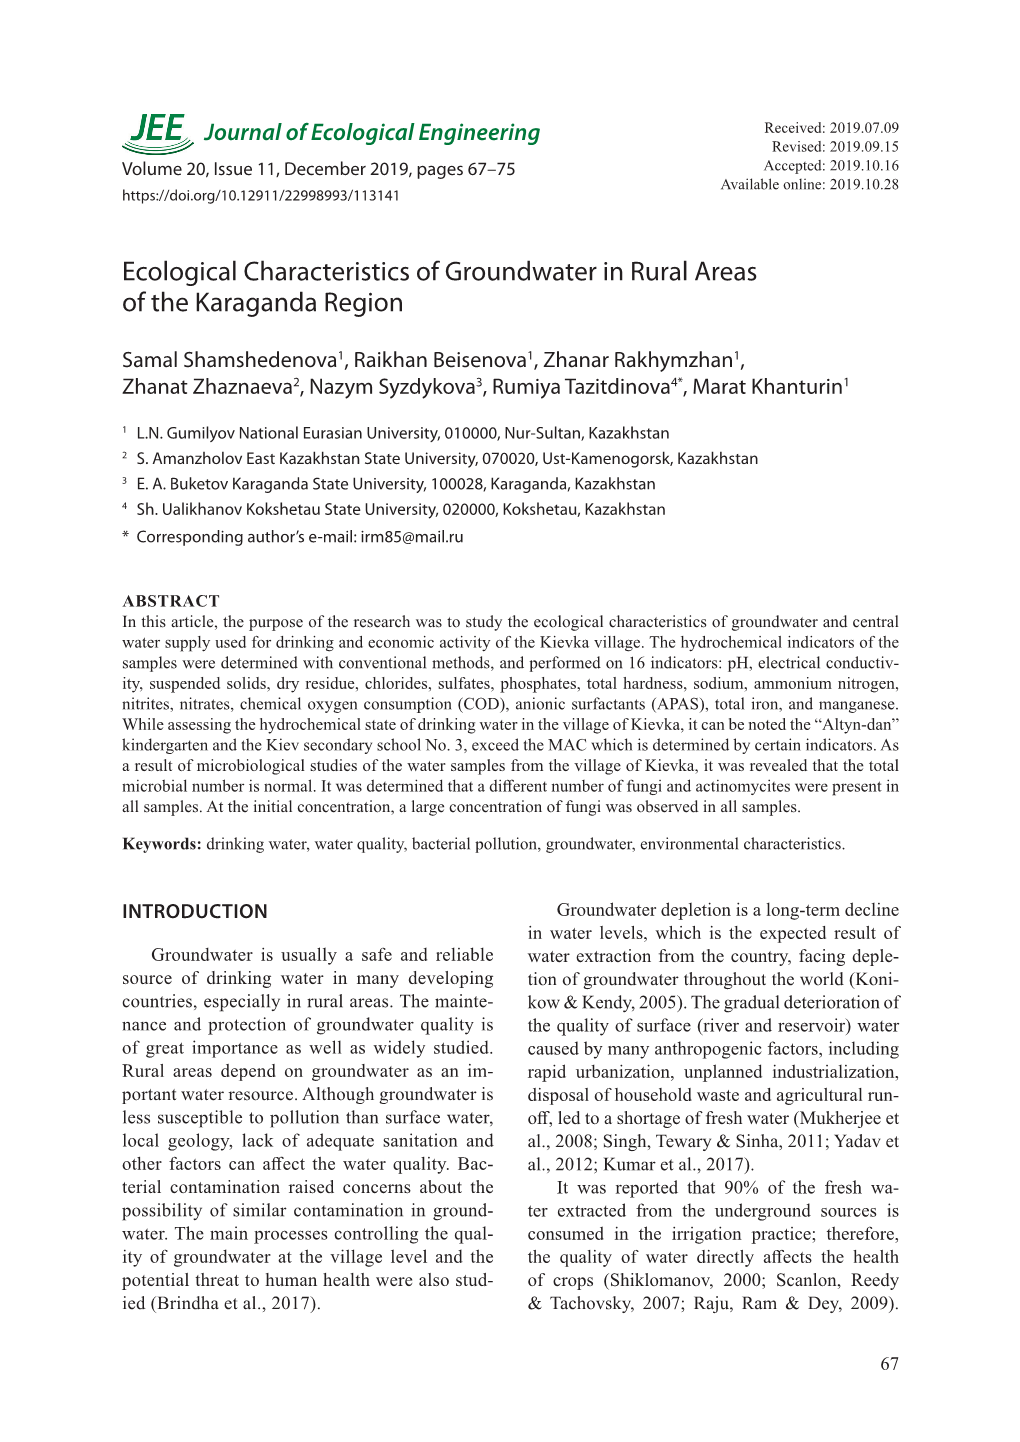 Ecological Characteristics of Groundwater in Rural Areas of the Karaganda Region